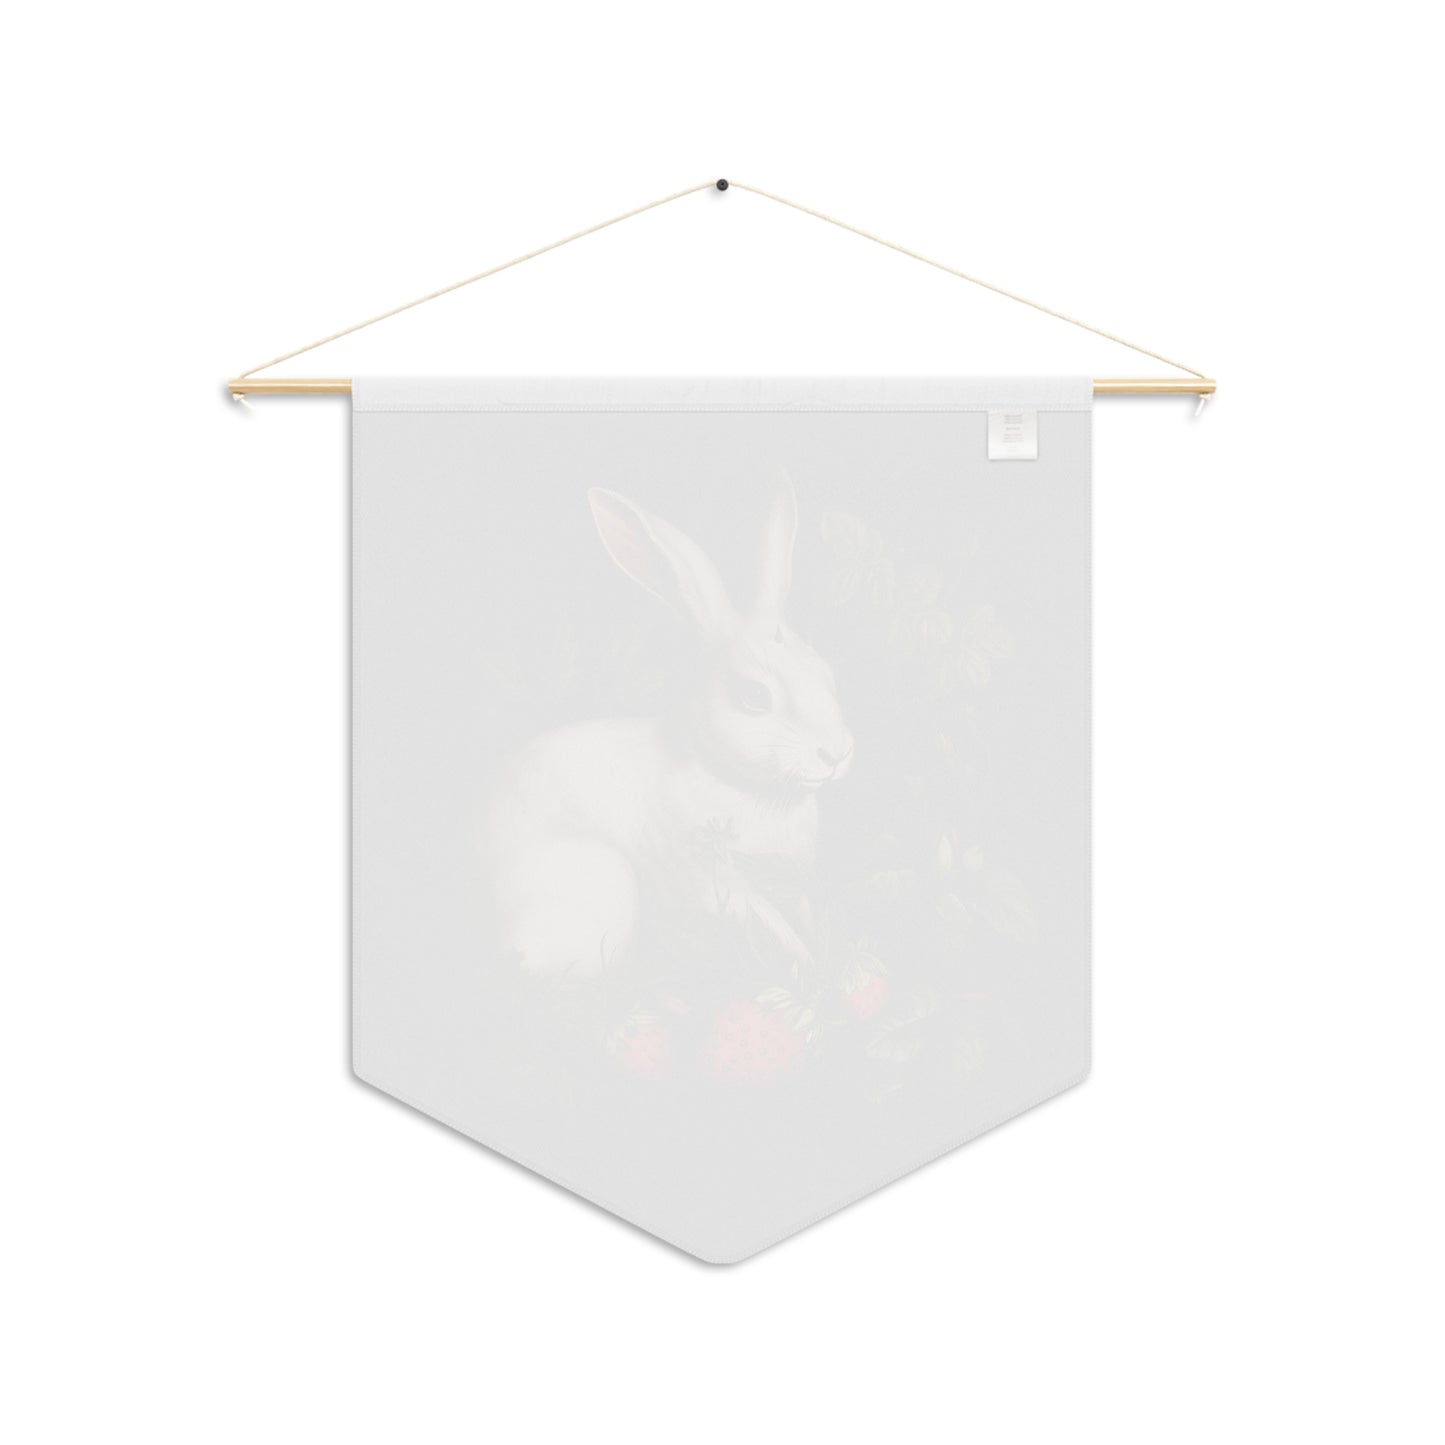 White Rabbit with Horns | Hanging Pennant